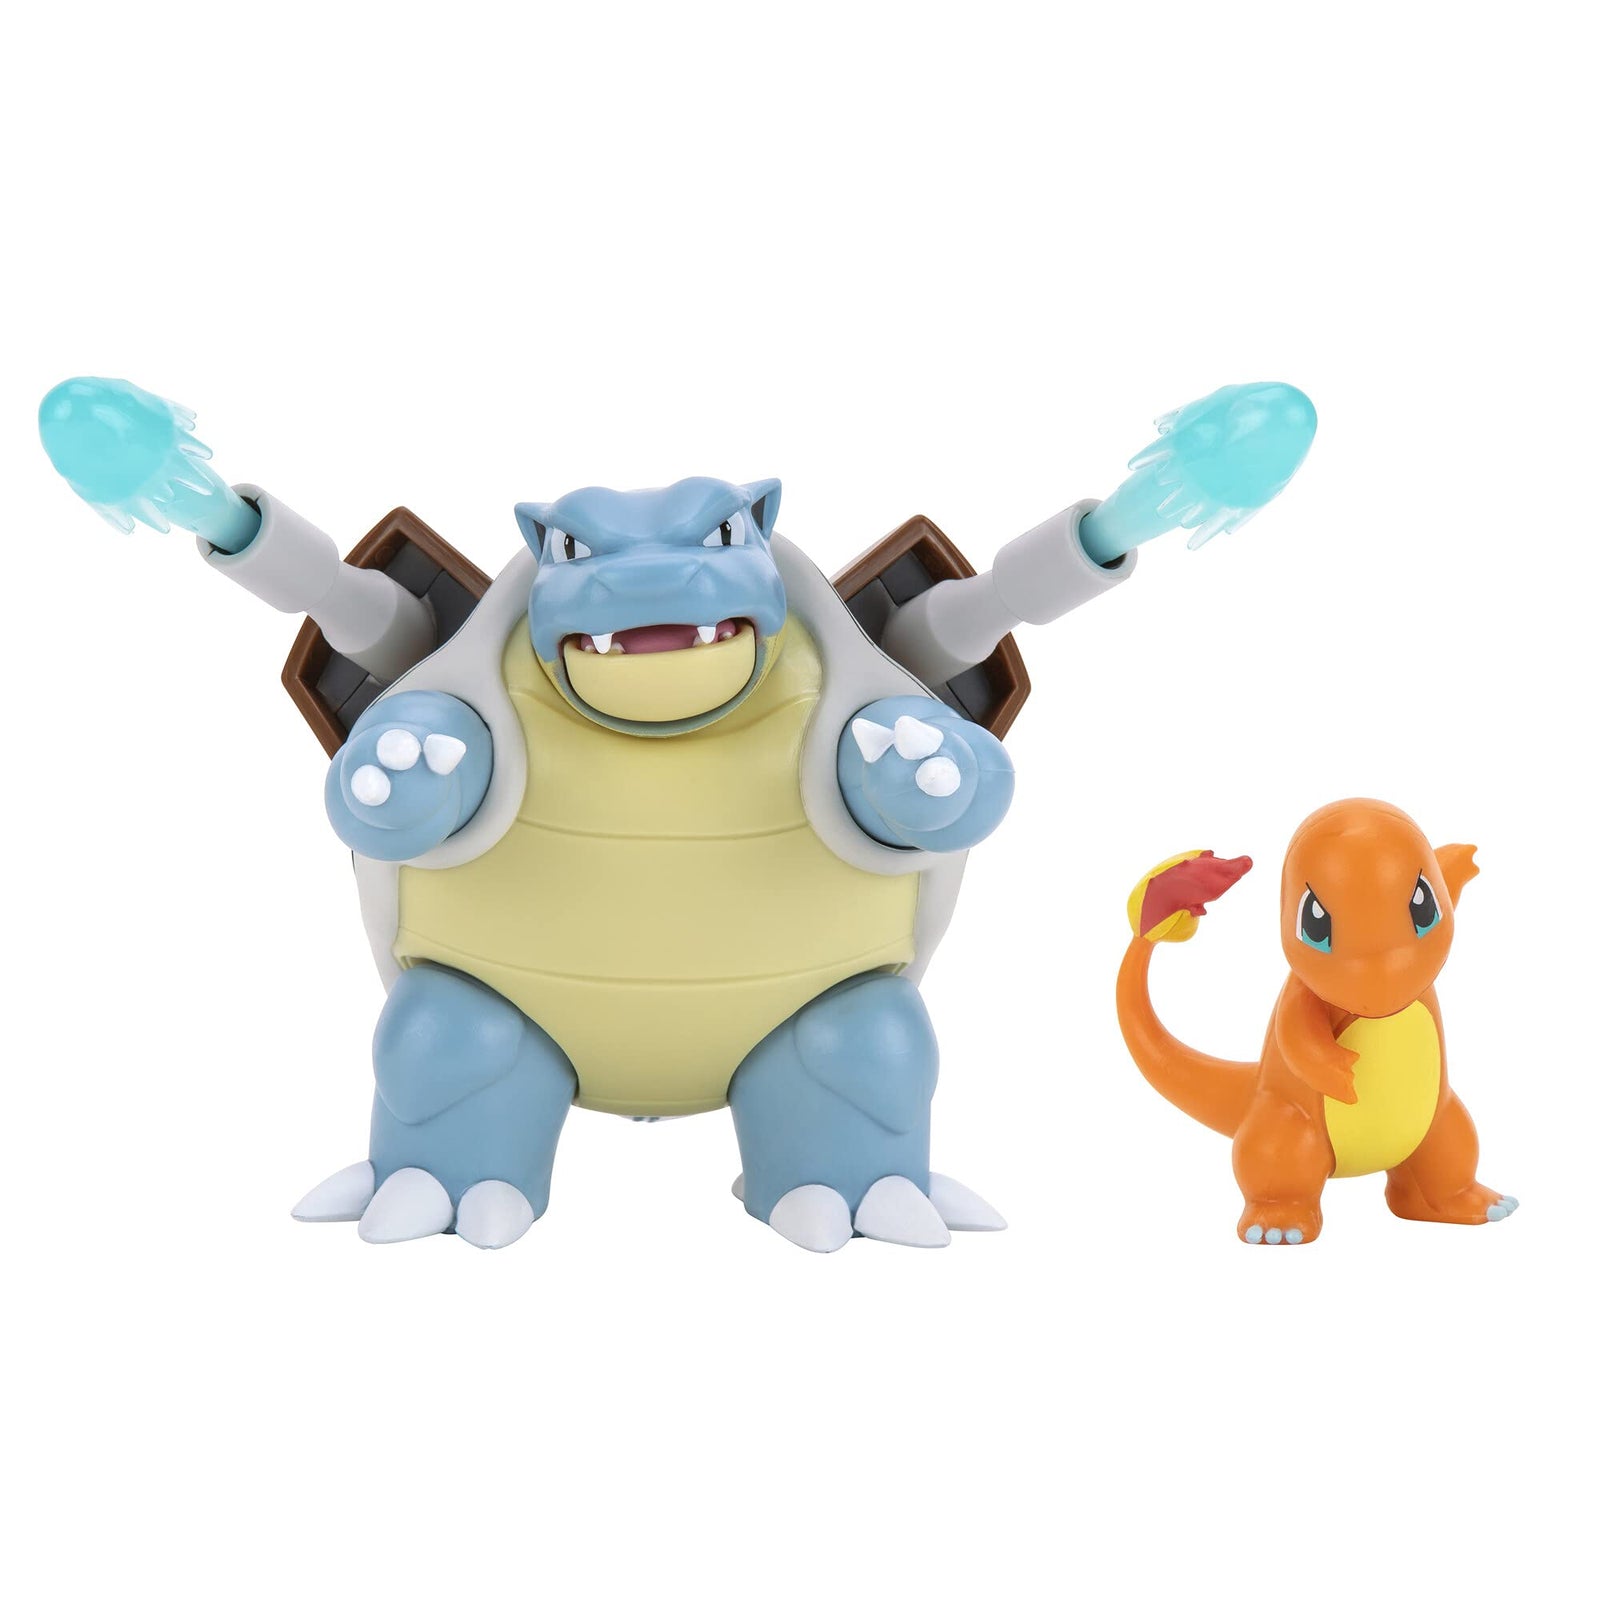 Pokemon Fire and Water Battle Pack - includes 4.5 Inch Flame Action Charizard and 2" Squirtle Action figures